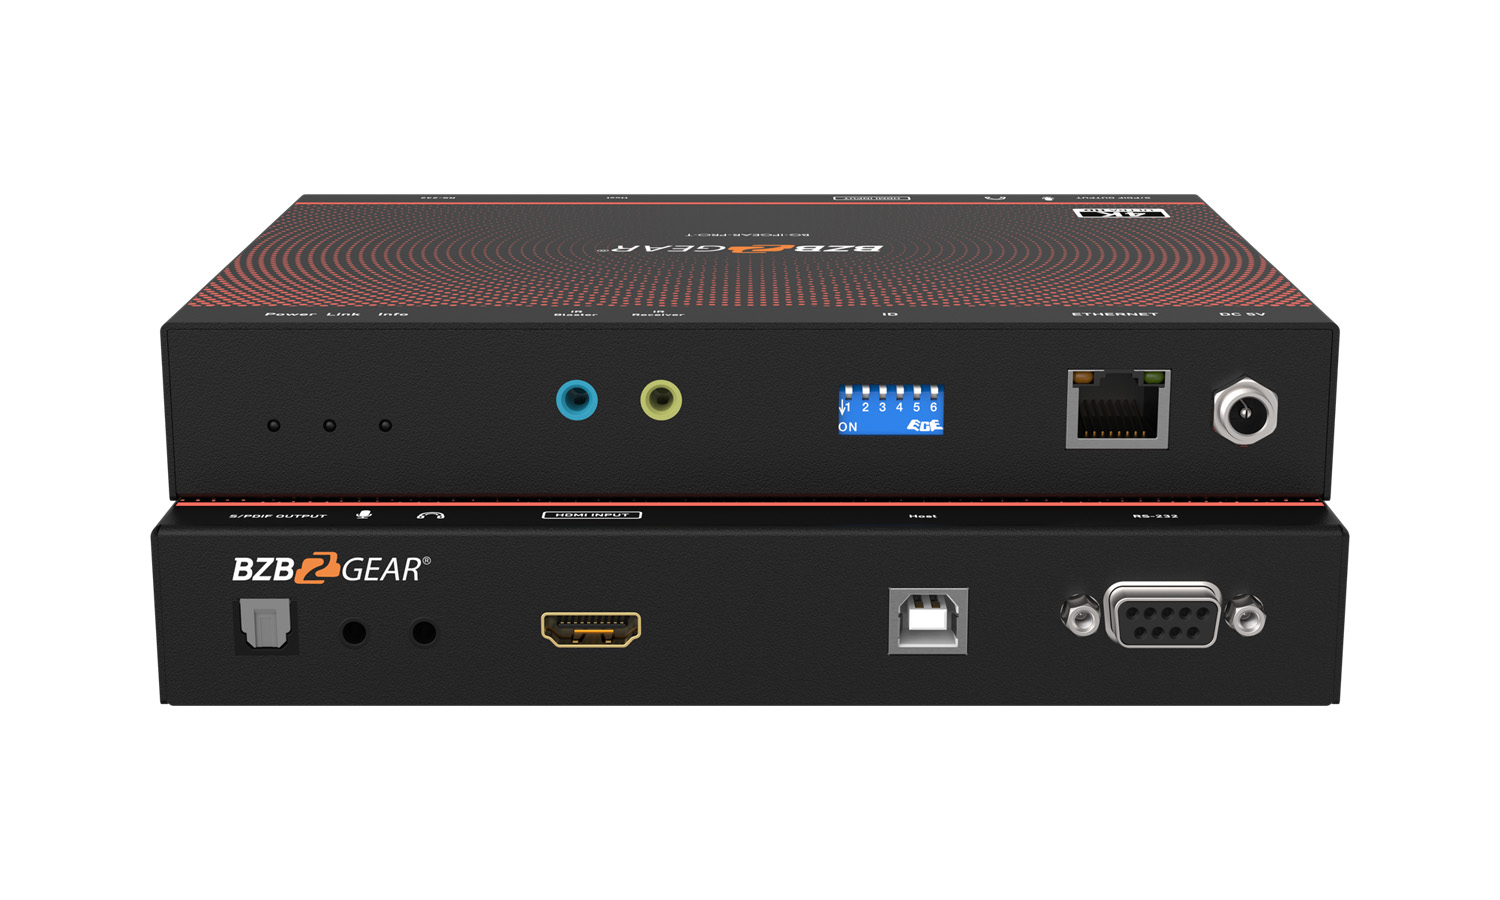 BG-IPGEAR-PRO-T 4K UHD AV over IP Multicast Transmitter with Video Wall, KVM and PoE support by BZBGEAR